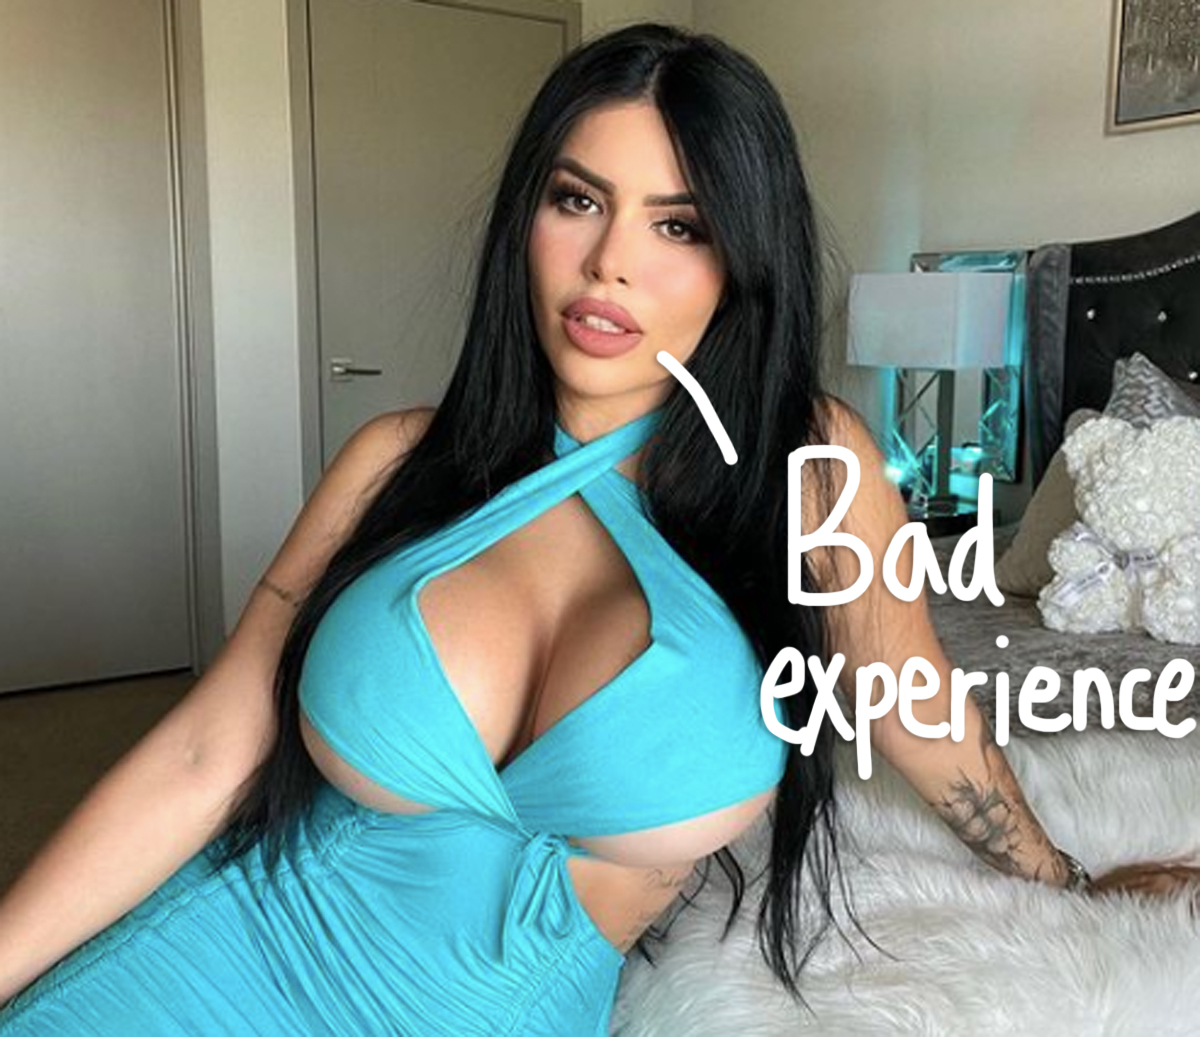 #90 Day Fiancé’s Larissa Dos Santos Lima Opens Up about Her ‘Botched’ Plastic Surgery Procedure That Cost Her A Belly Button